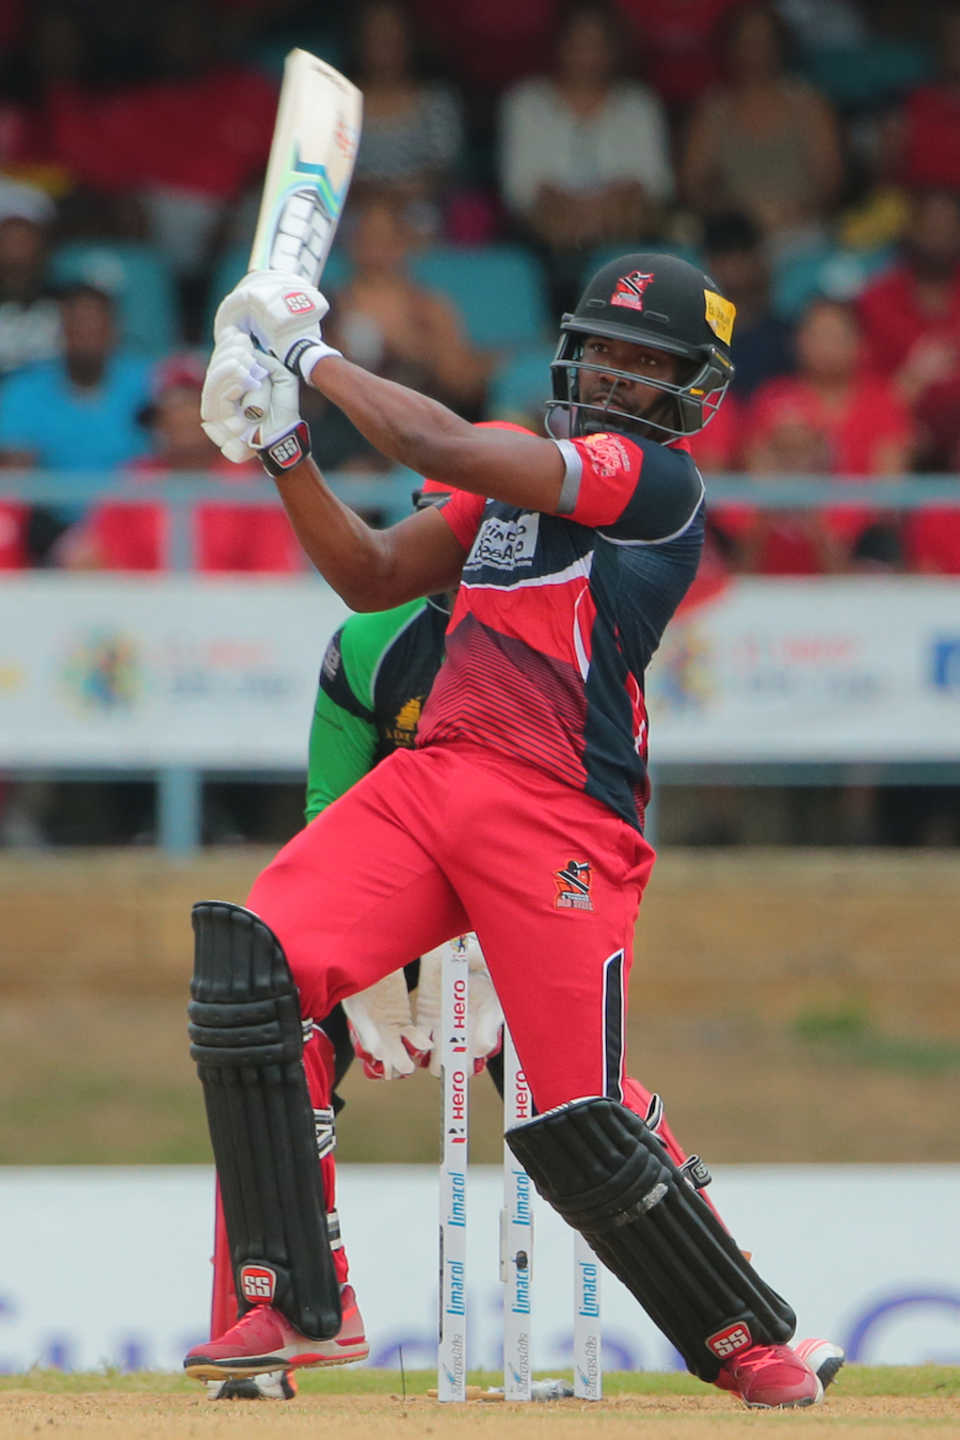 Darren Bravo hammered five sixes in the 15 balls he faced